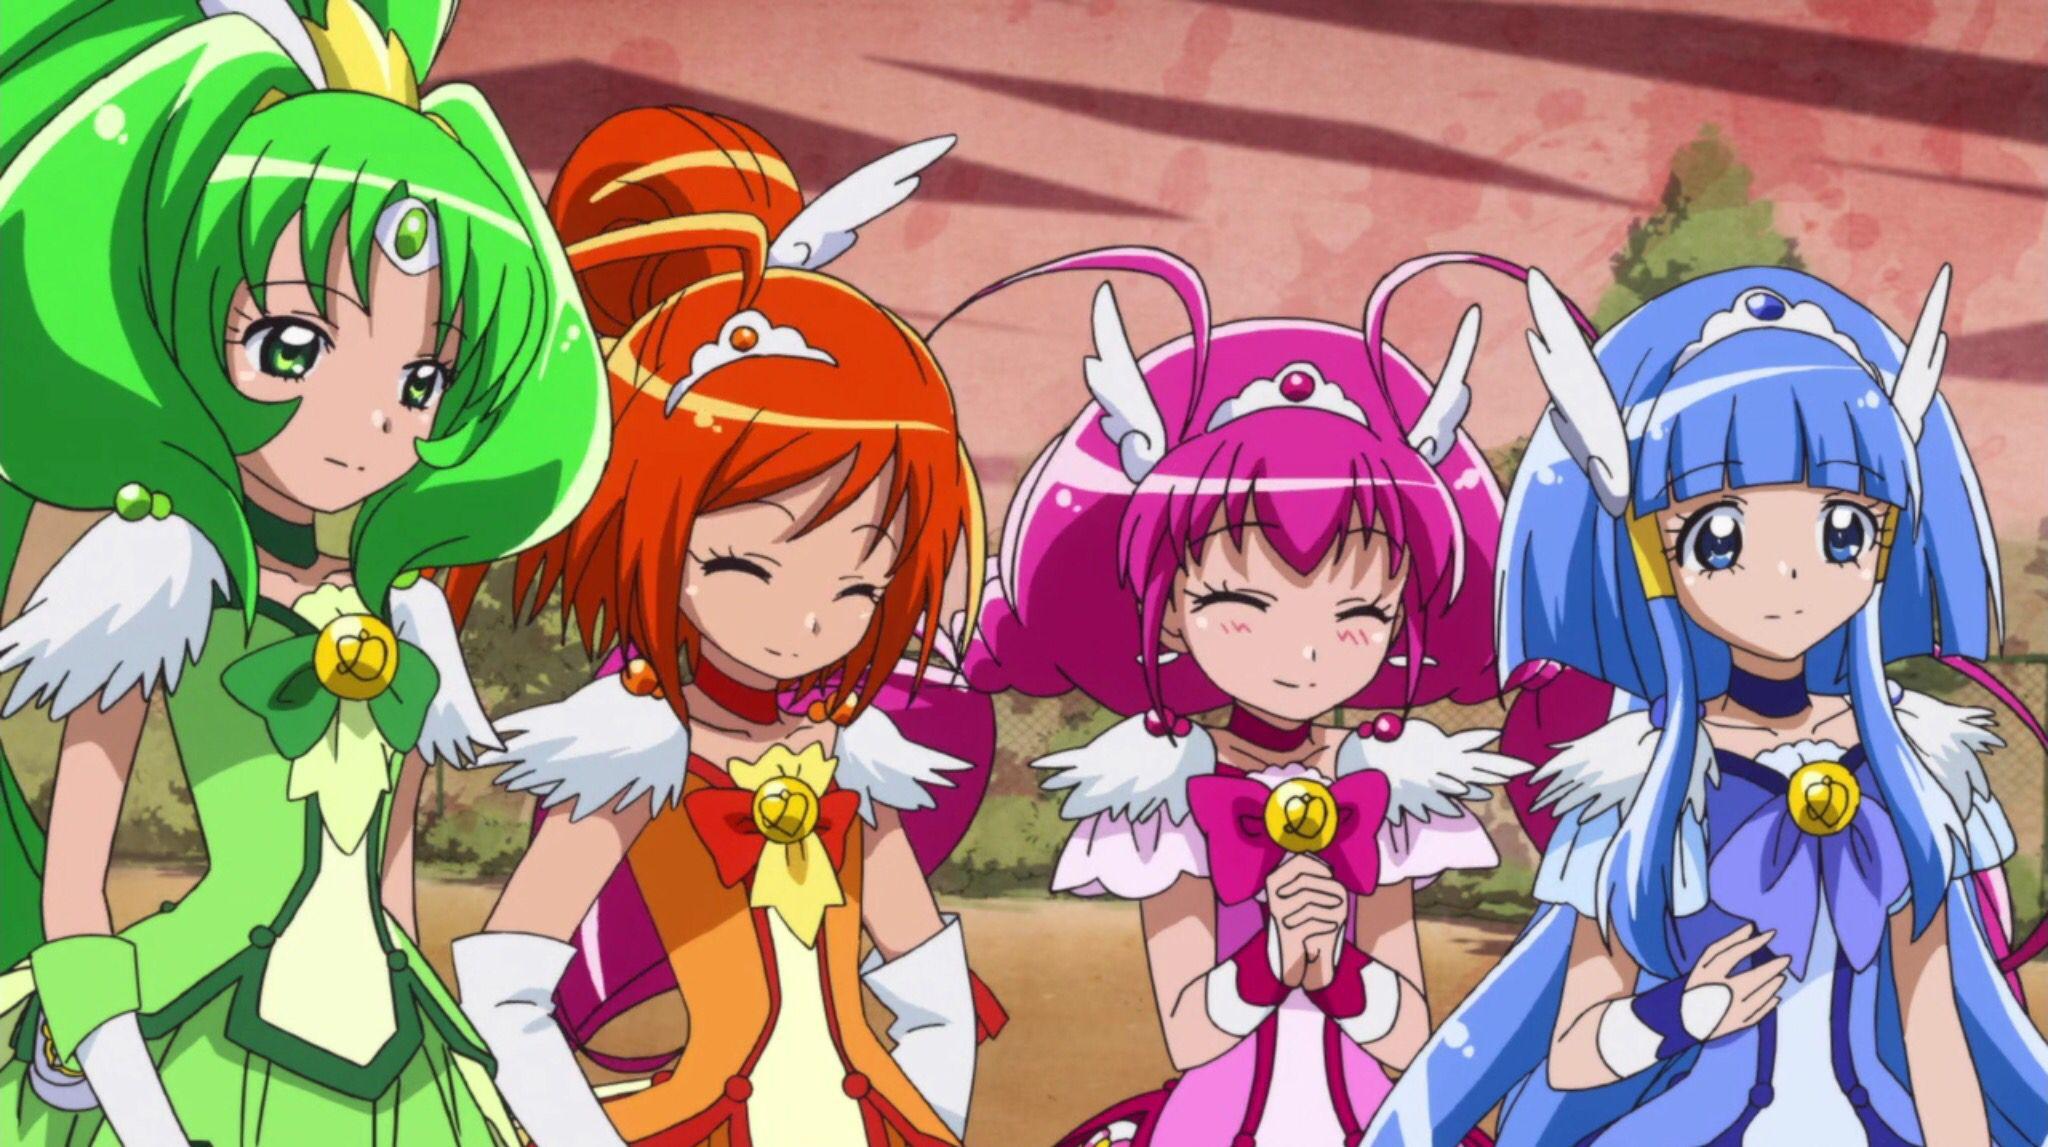 4 of the Glitter Force.